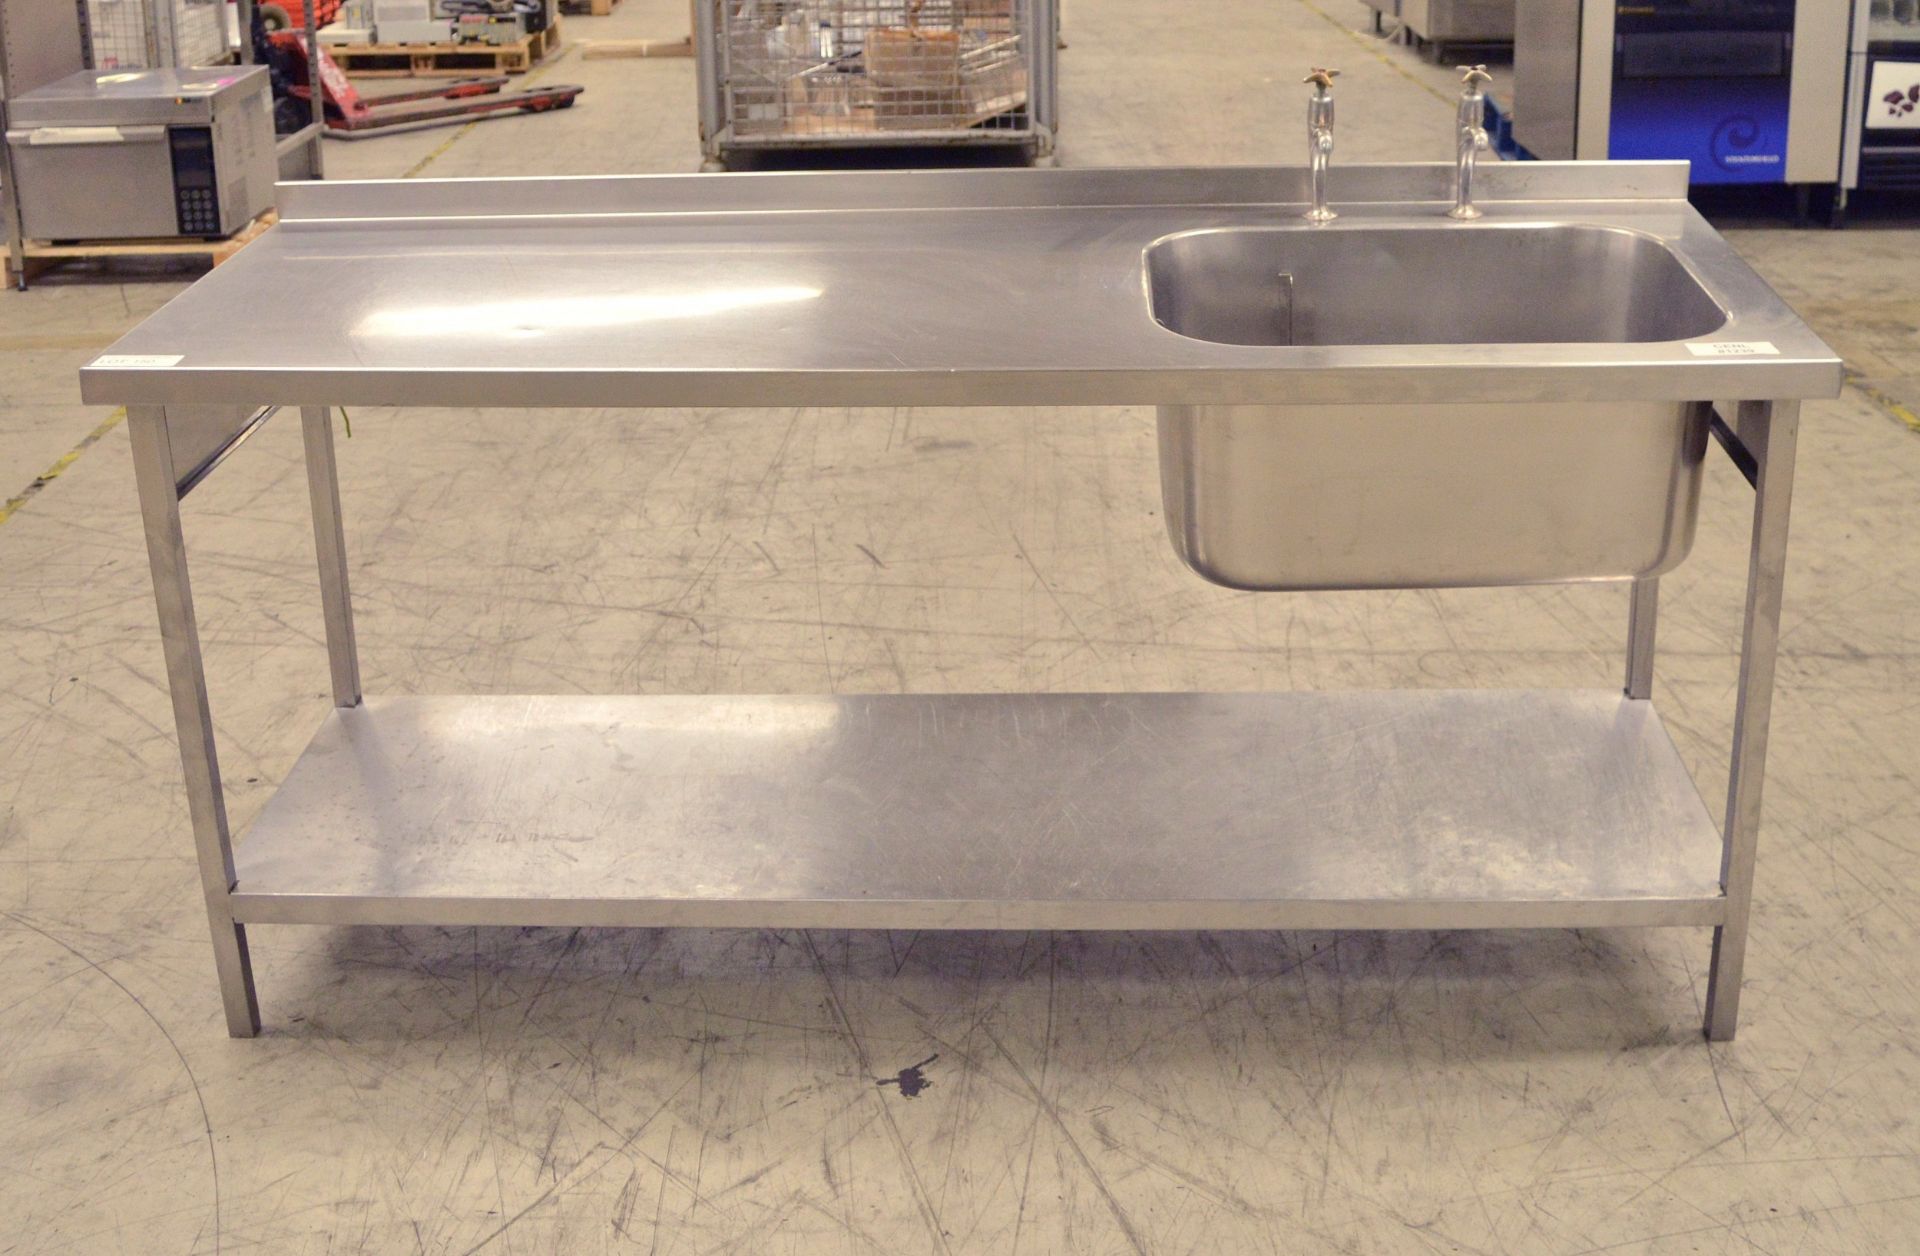 Stainless Steel Single Sink & Counter Table with Single Taps - L1800 x W660 x H900mm